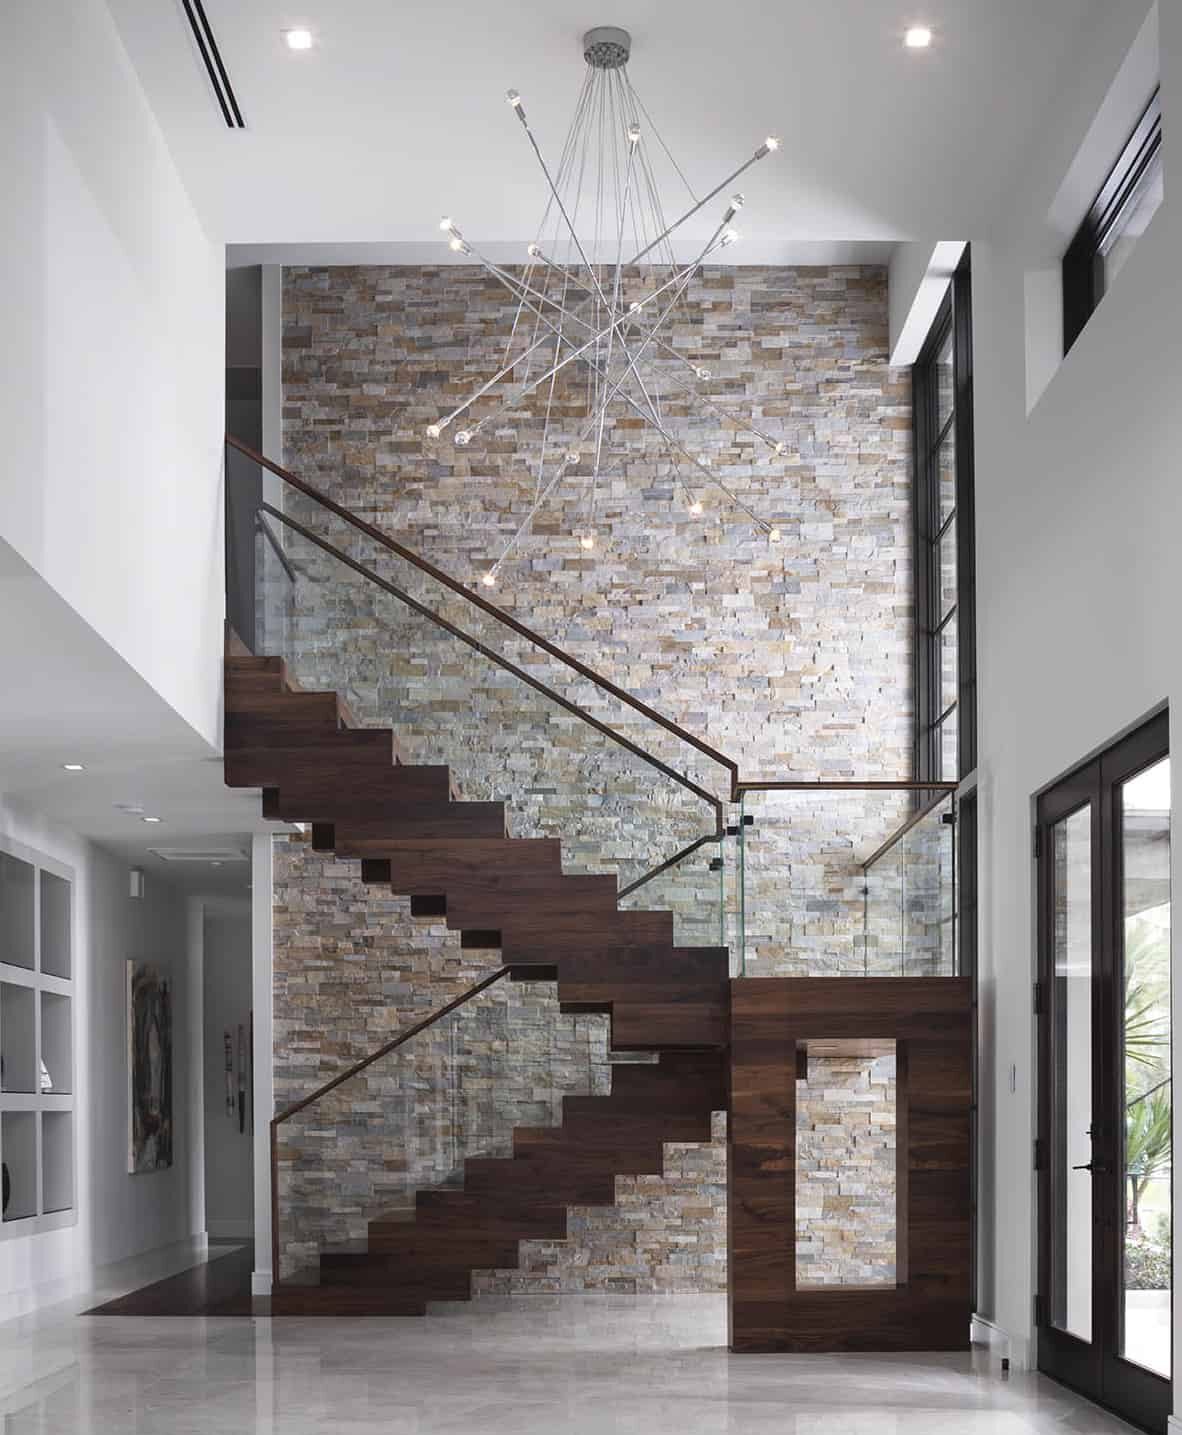 Modern stairway with Stone-Veneer-wall in a Home-Interior with wood stairwell details